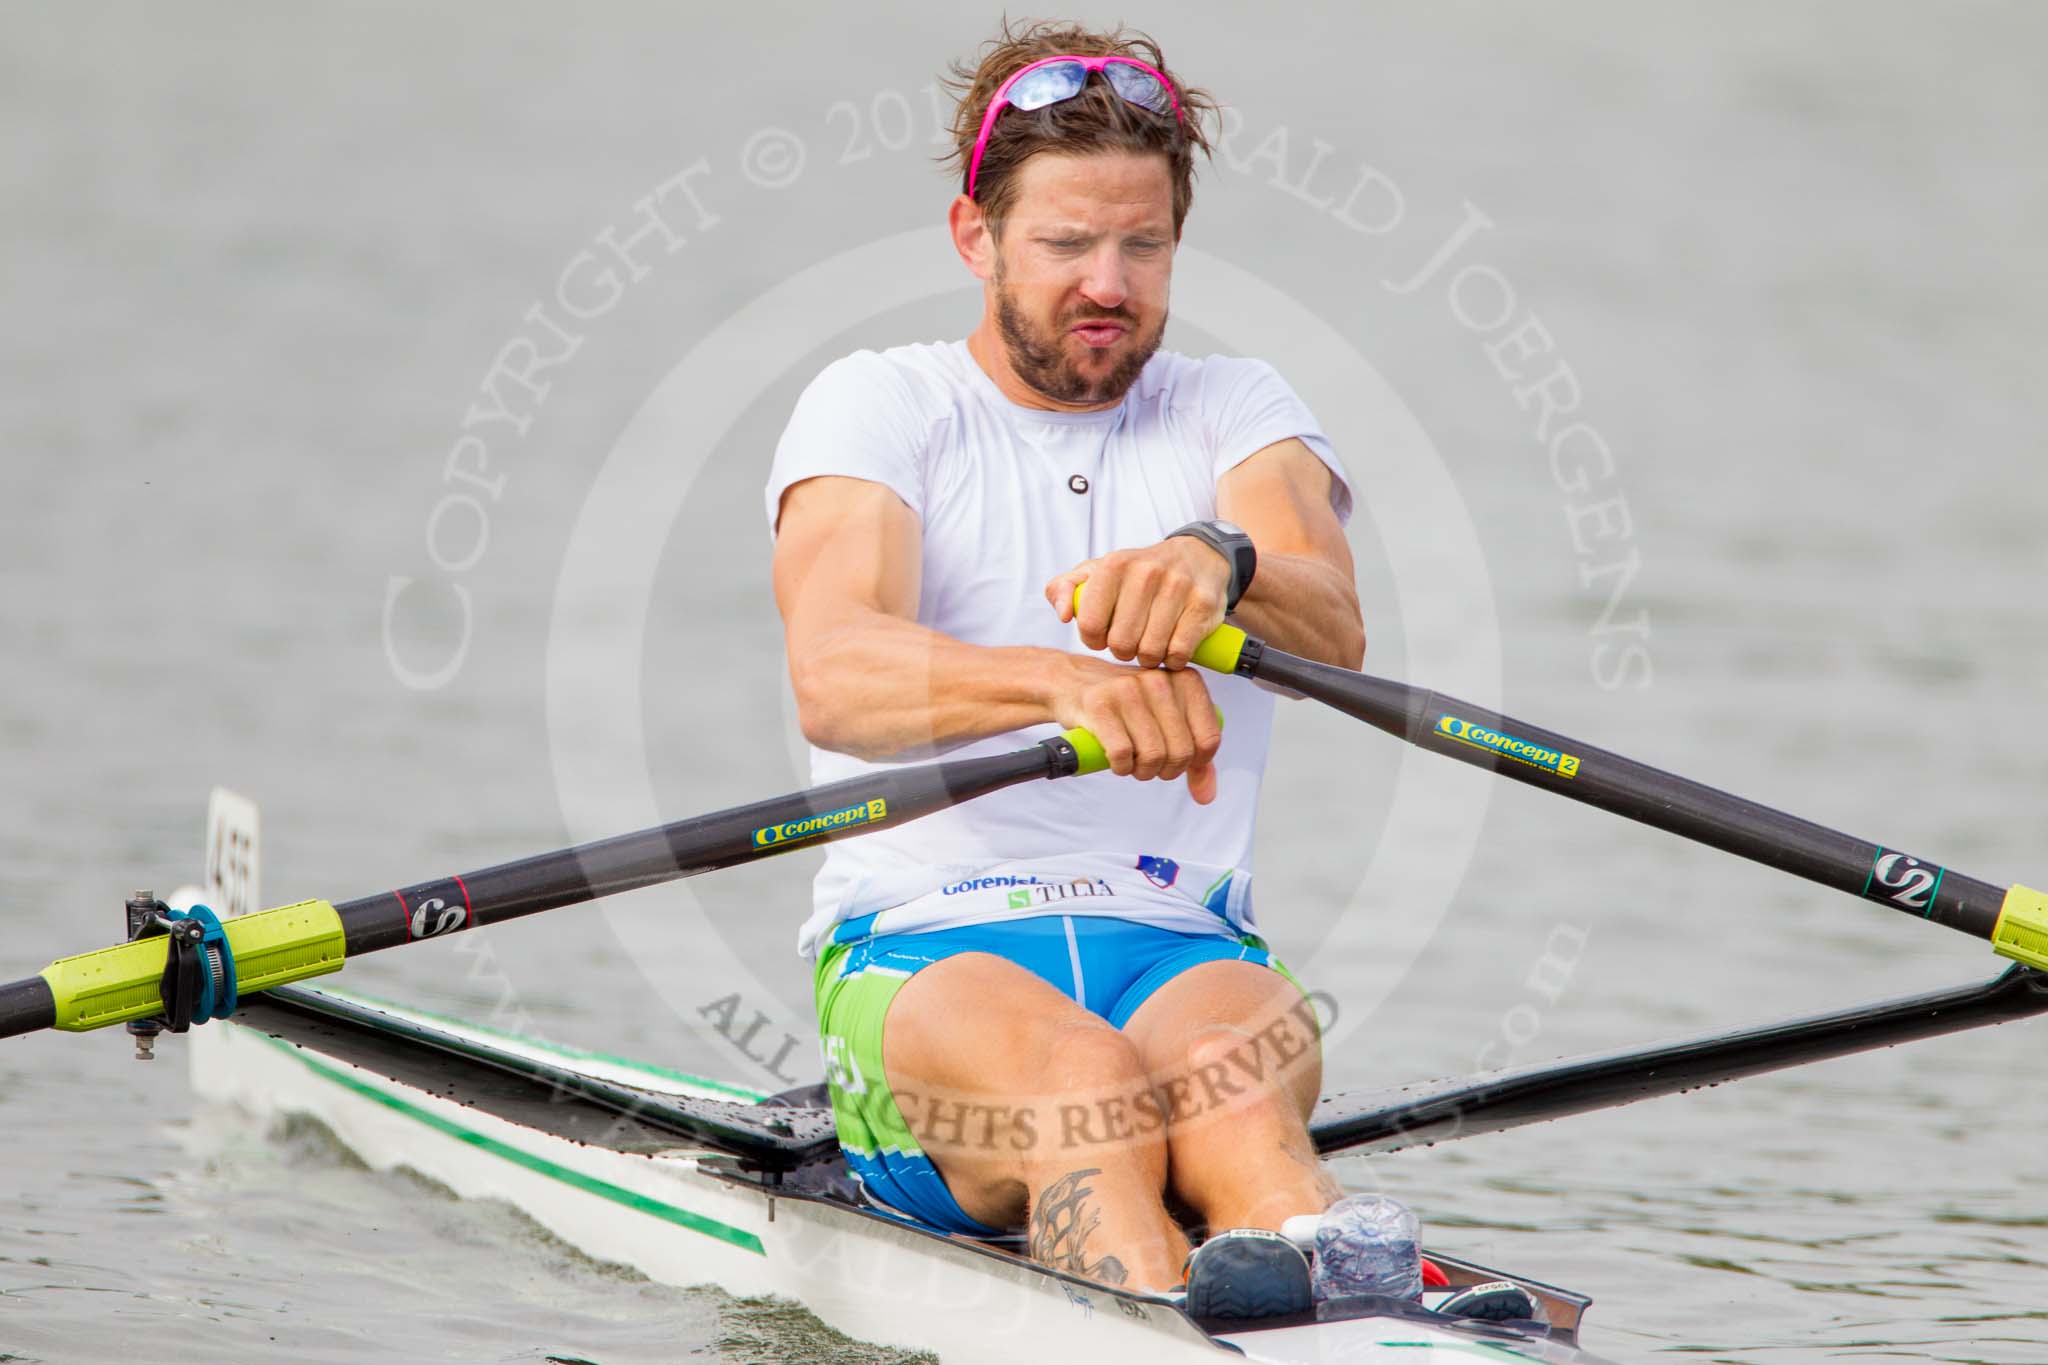 Henley Royal Regatta 2013, Saturday: Luka Špik, a Slovenian rower and Olympic gold medalist, during a training session in the morning. Image #28, 06 July 2013 08:58 River Thames, Henley on Thames, UK